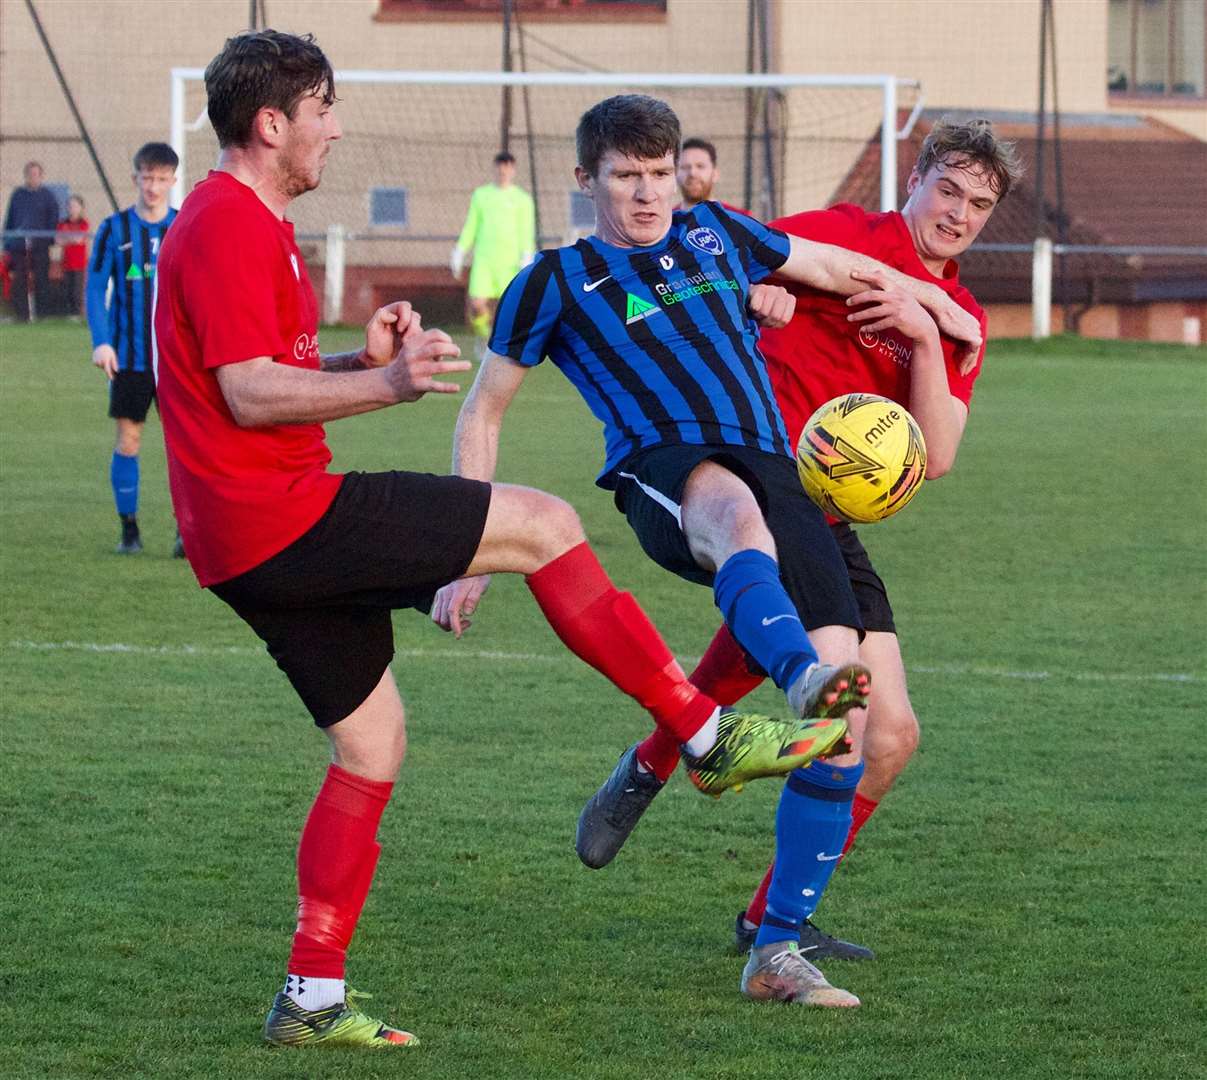 Ellon United's Dean McDonald and Scott Gray close in on the Hermes player. Picture: Phil Harman